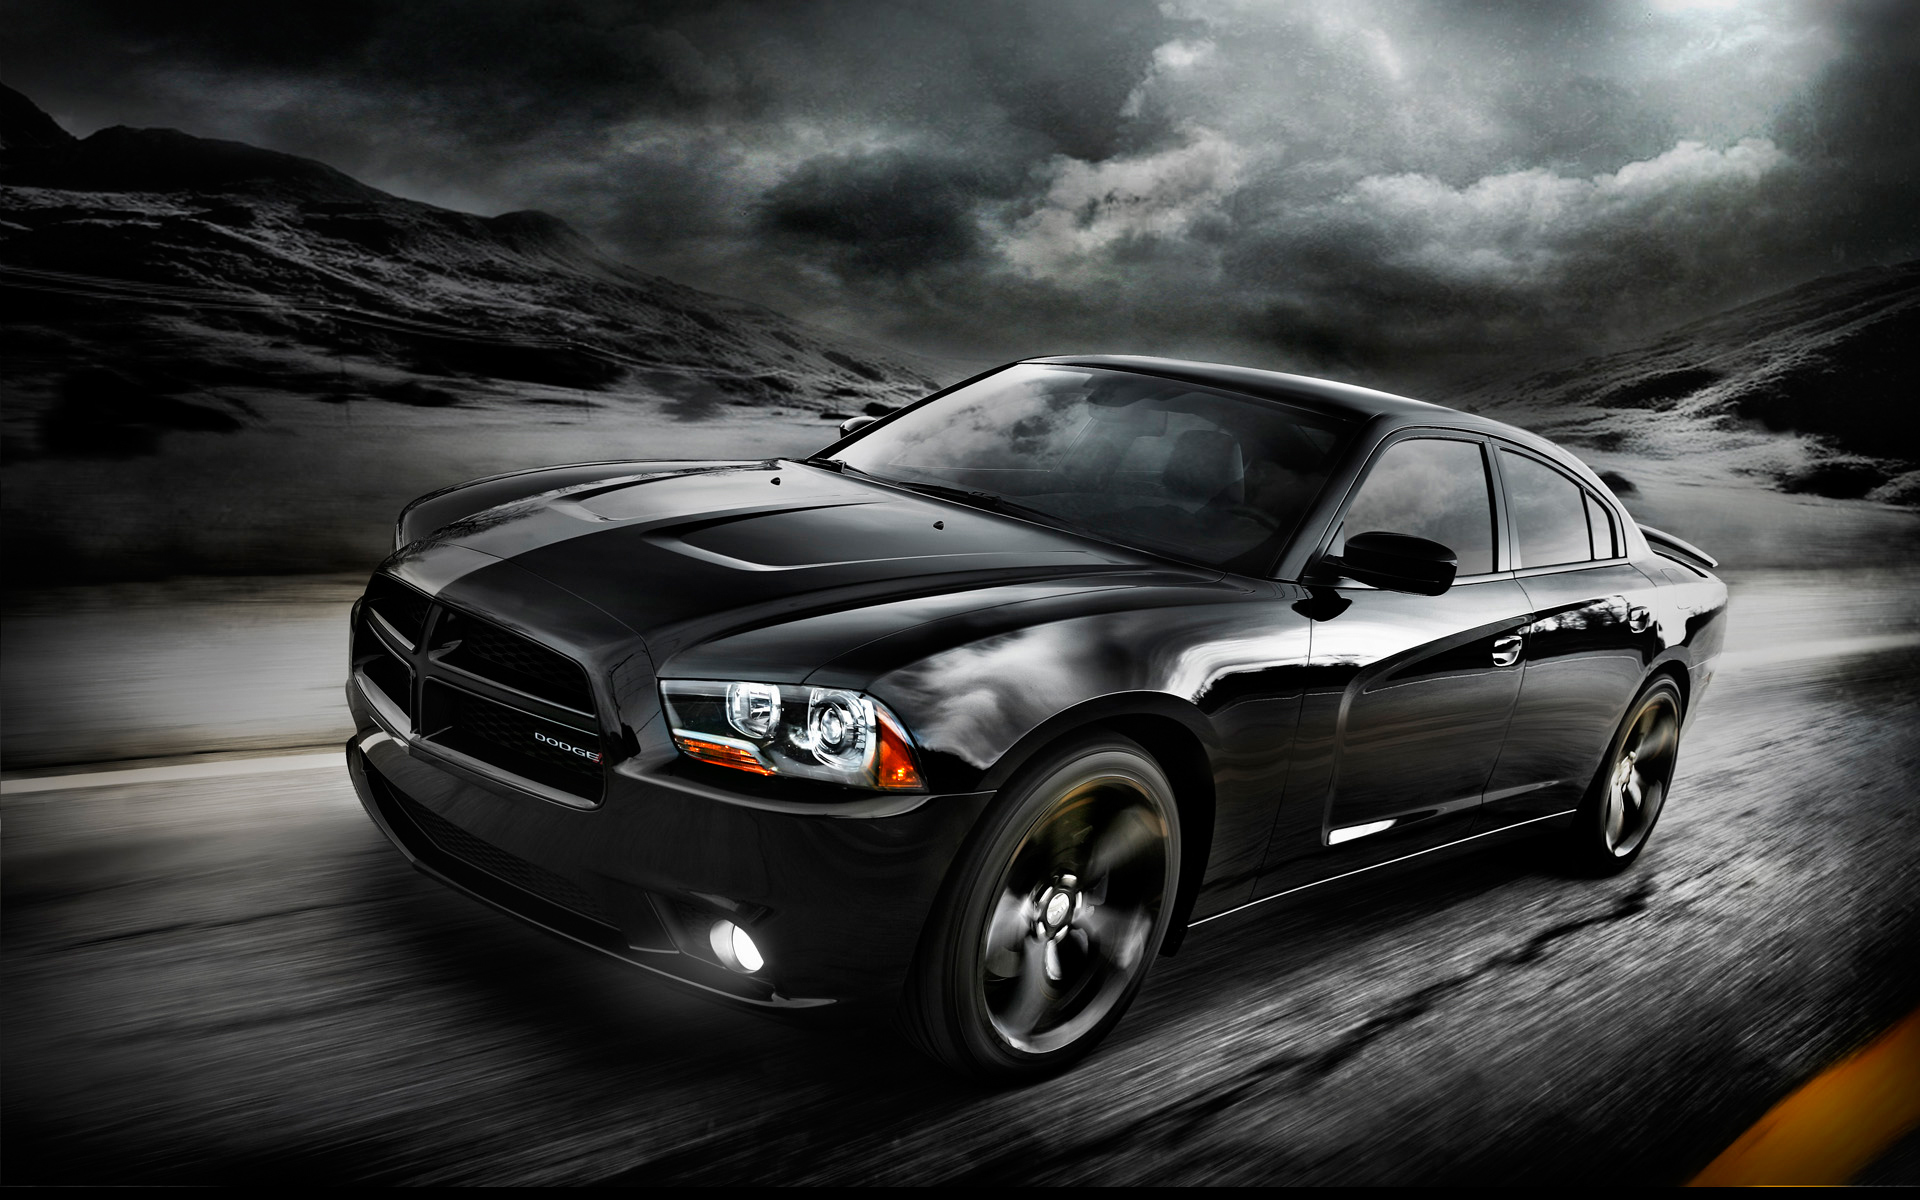 2012 Dodge Charger Wallpaper HD Car Wallpapers